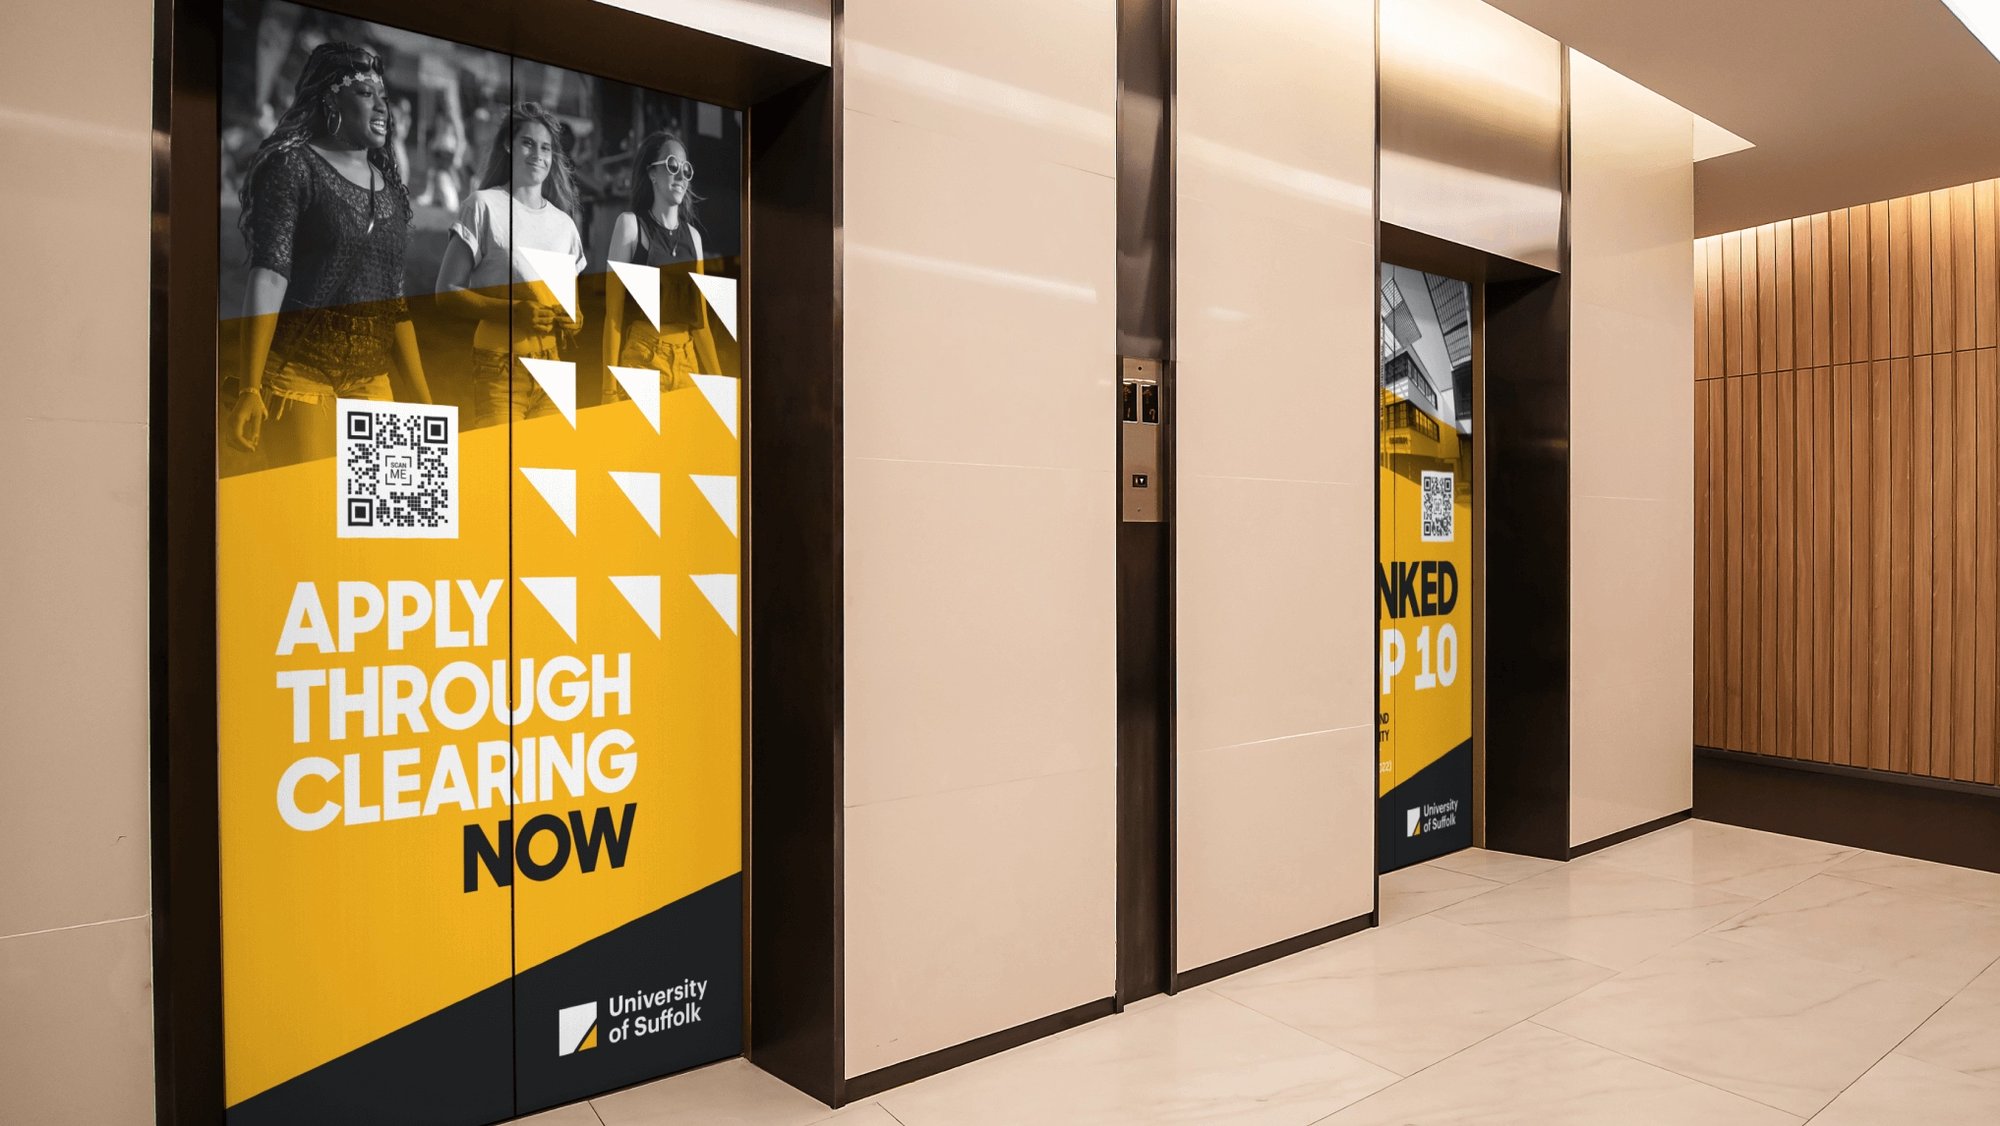 Lift doors featuring the campaign messaging.